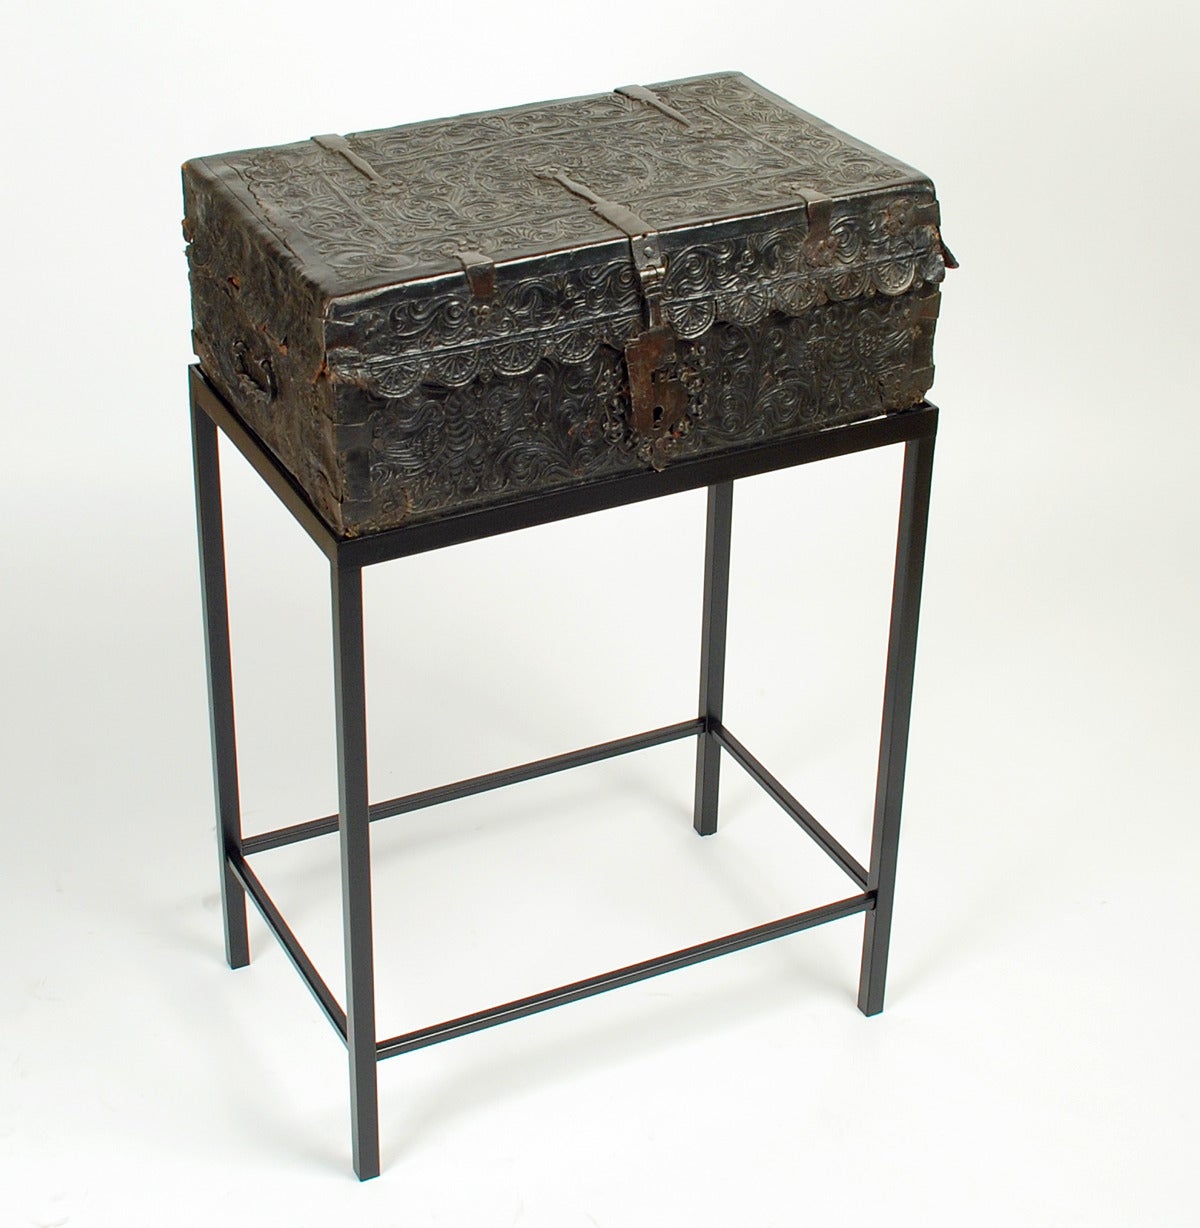 A superb early 18th century hand tooled and embossed leather Spanish Colonial petaca (document box) with beautiful hand-forged iron hasp, hinges and lock-plate. Overall with a rich and lustrous surface patina. The interior lined in very early